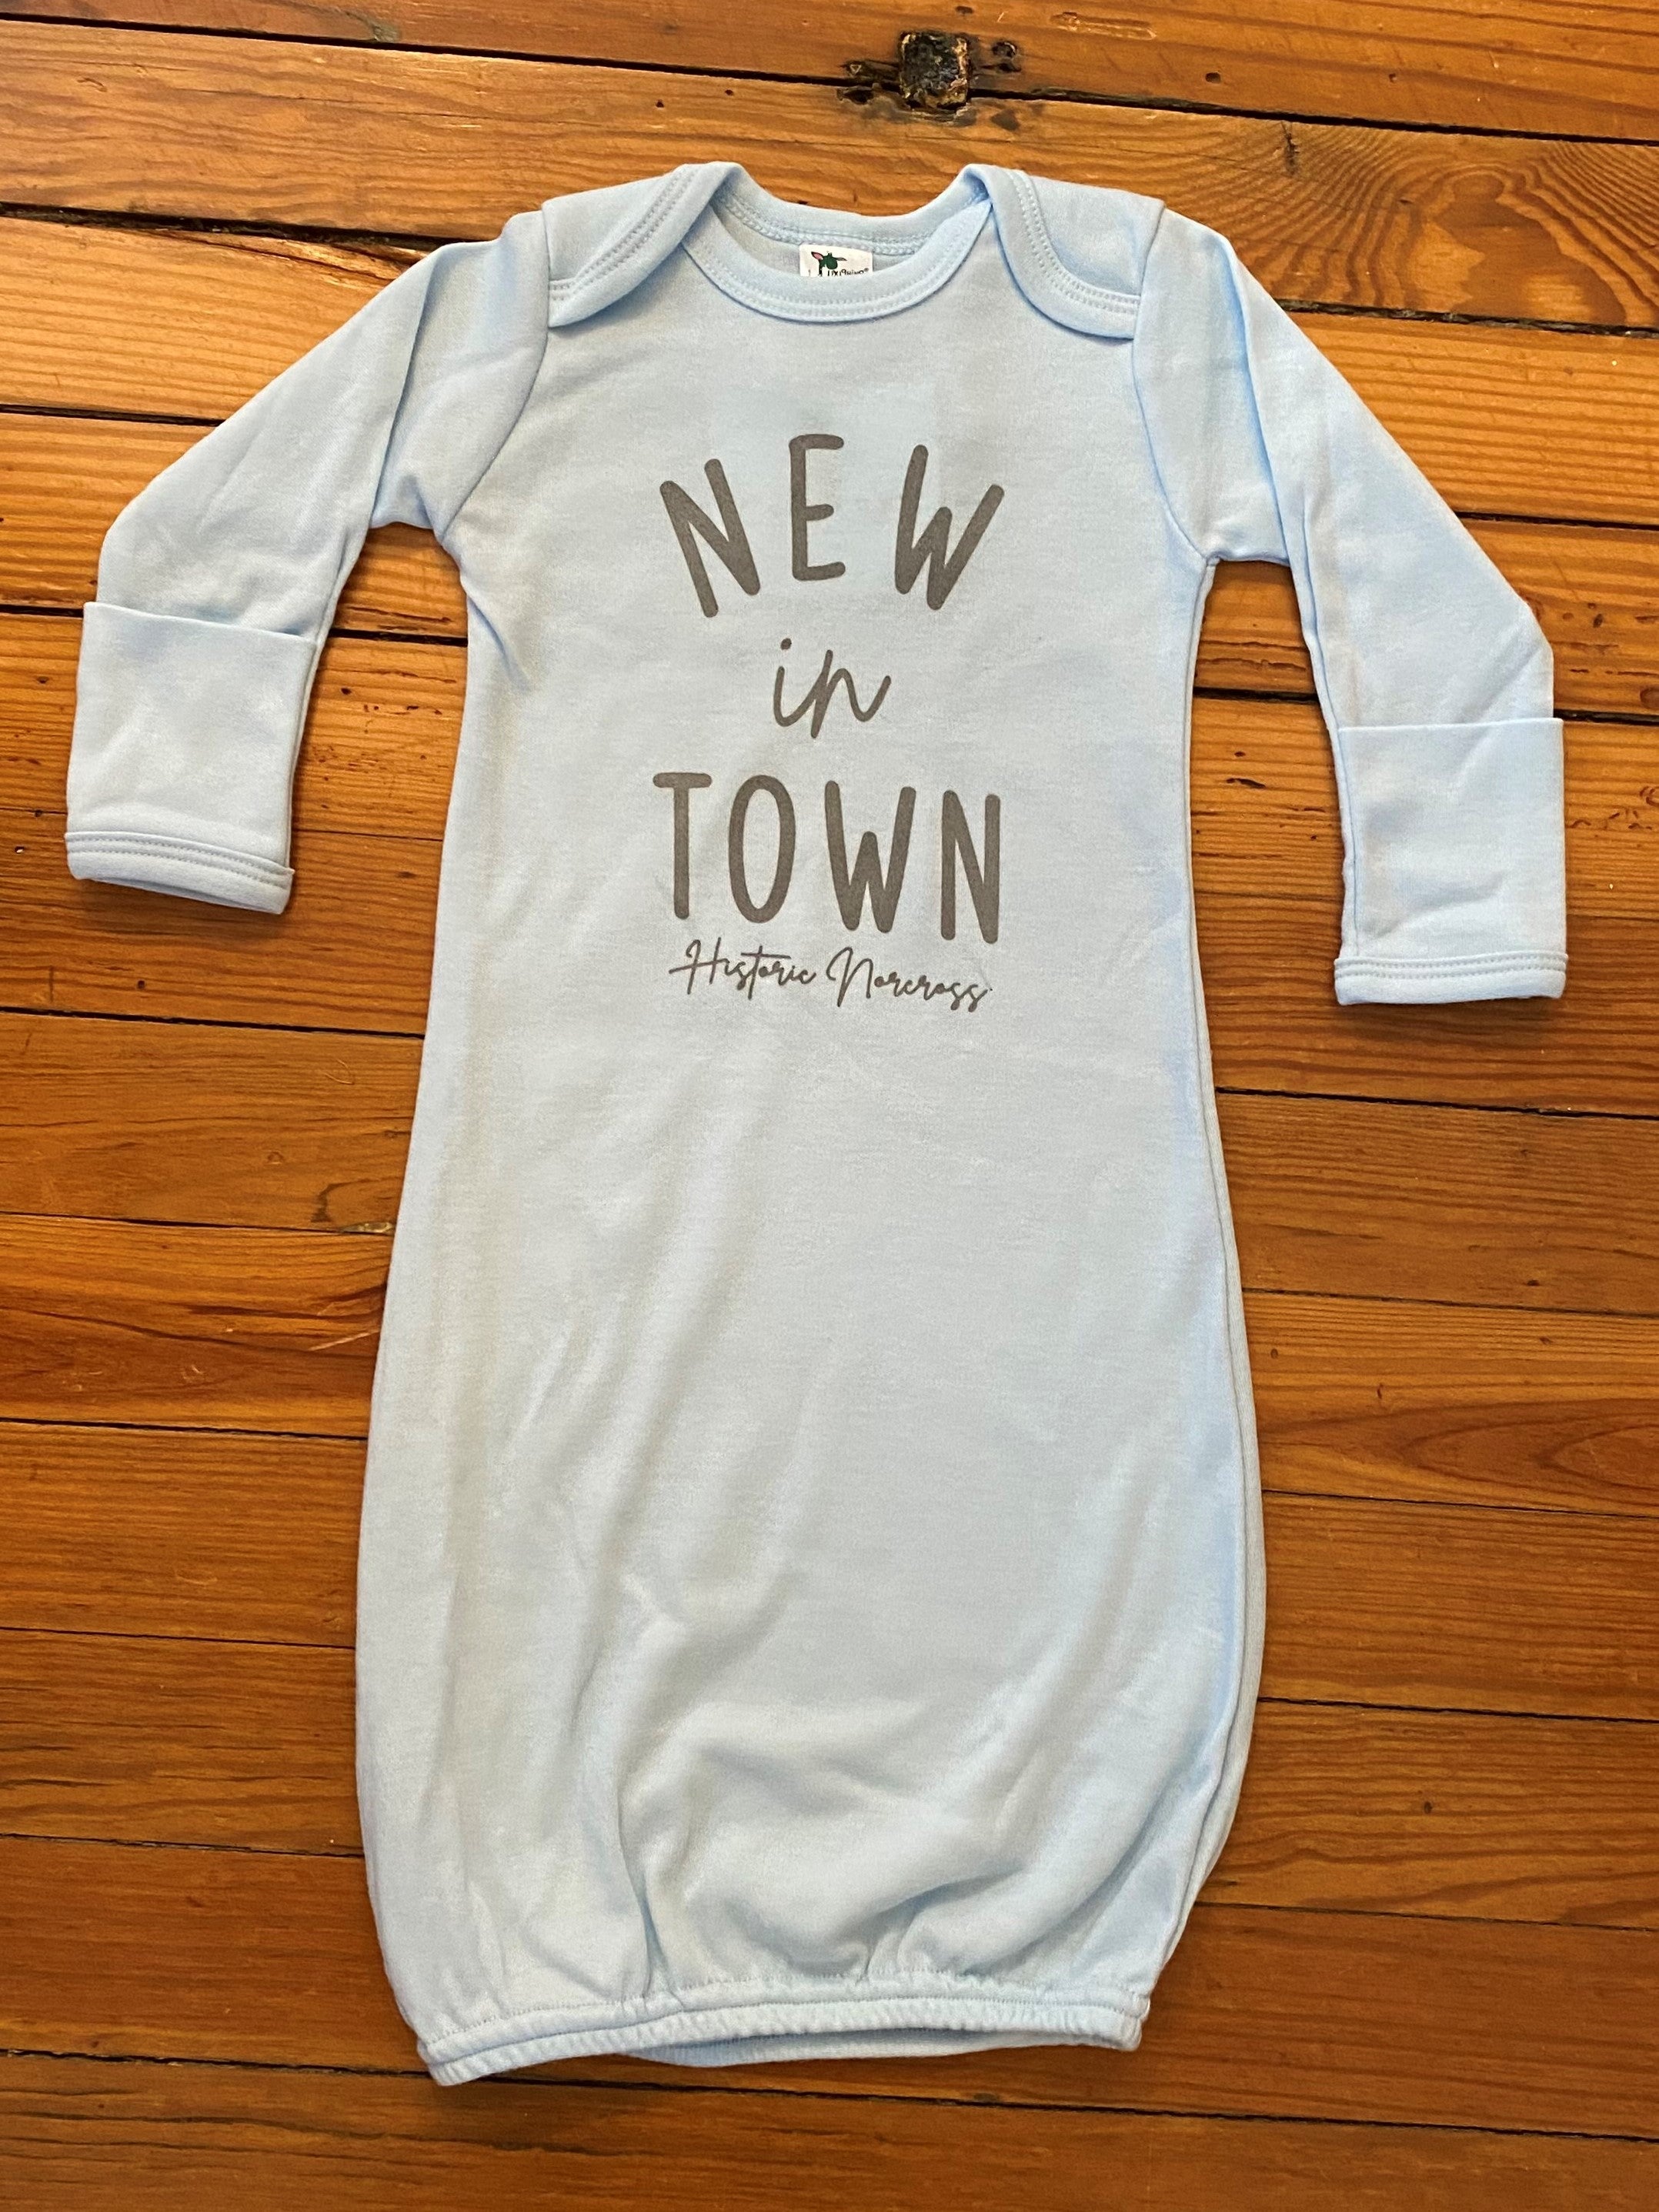 Historic Norcross "New In Town" Infant Onesie & Gown